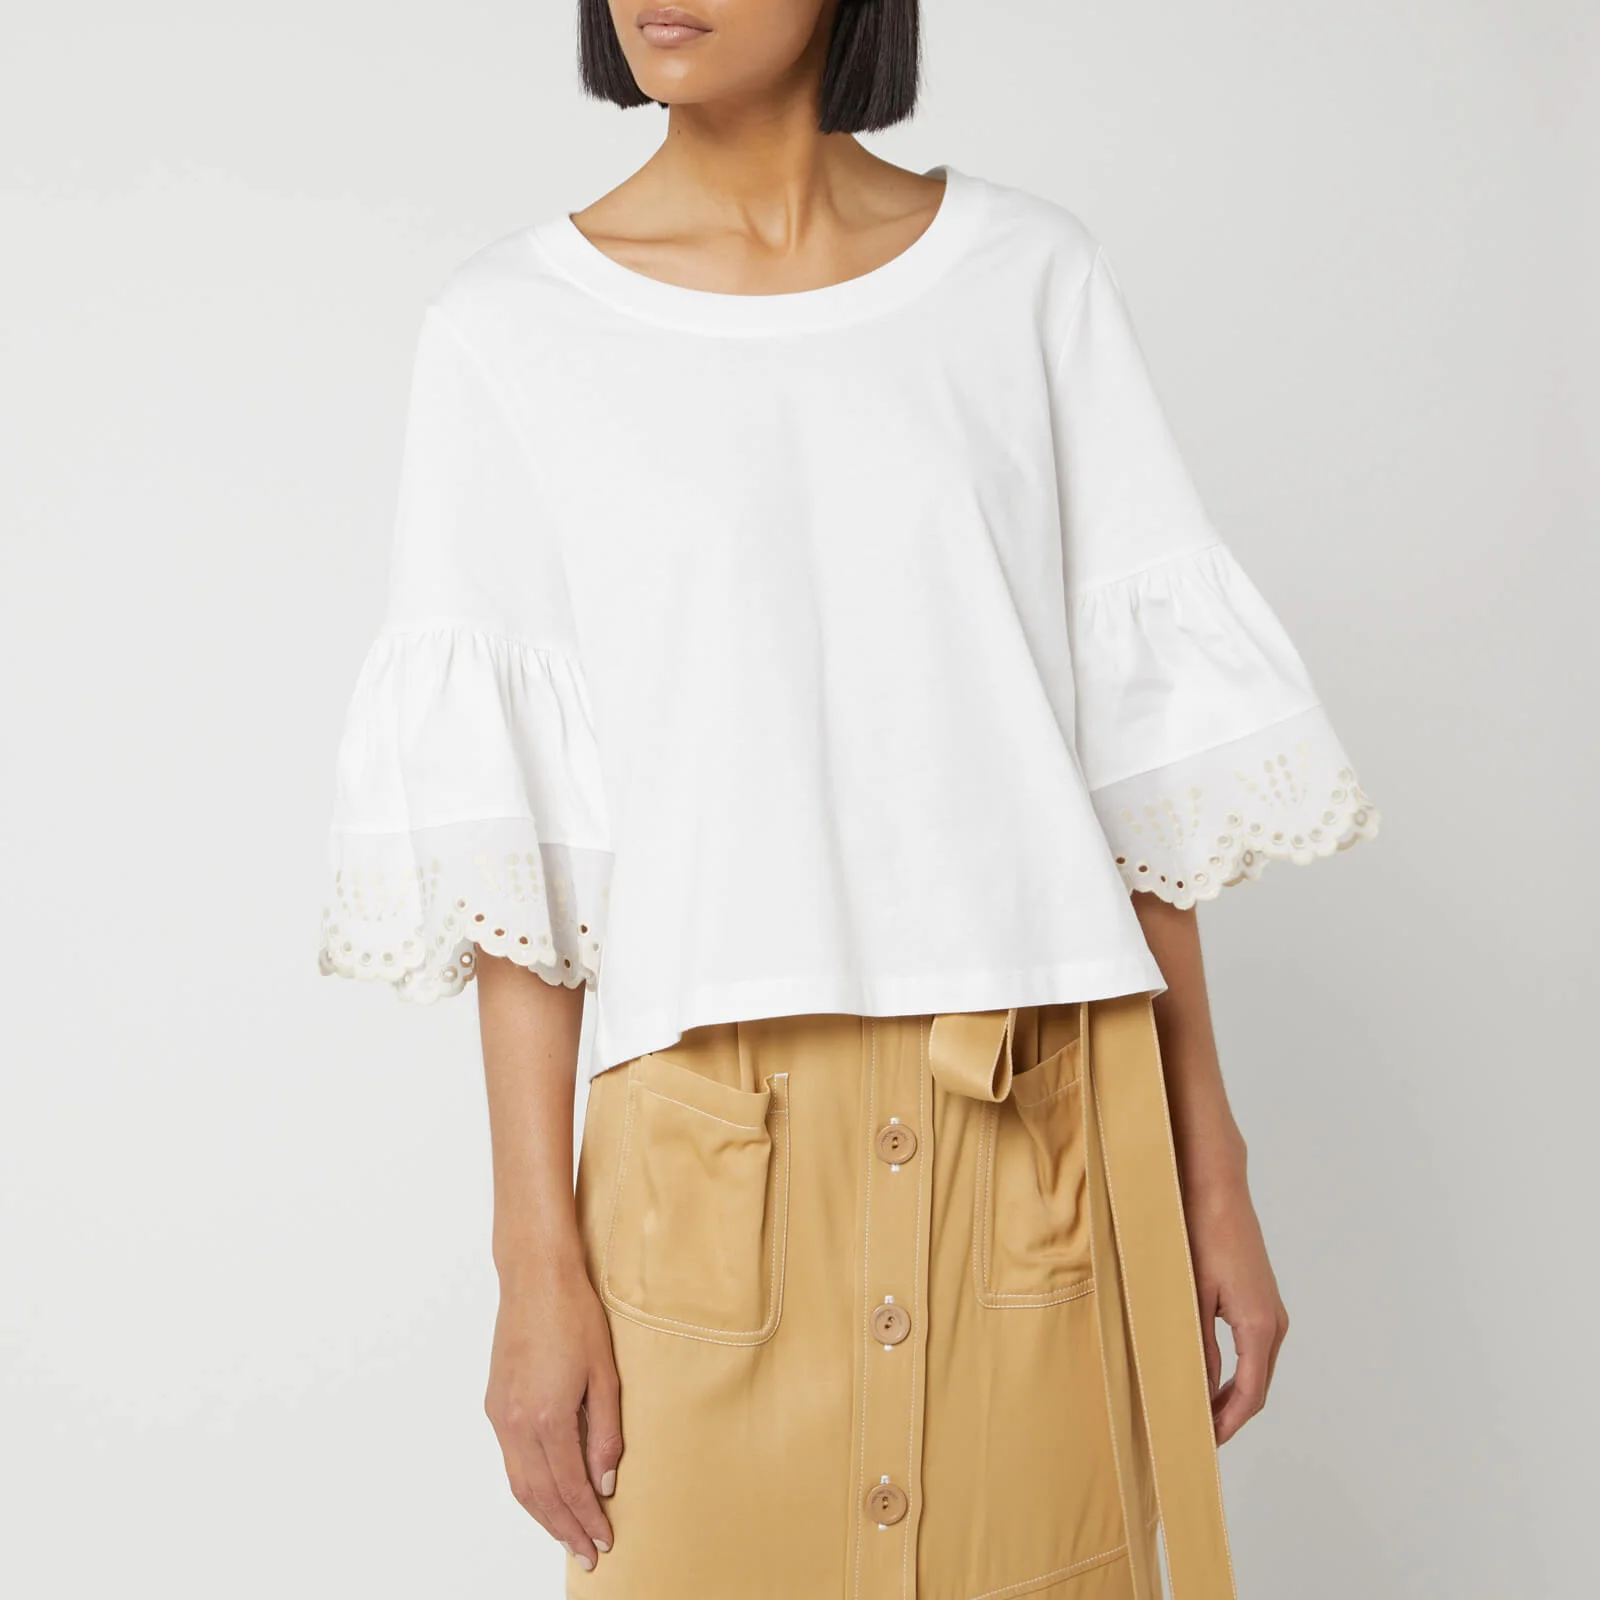 See By Chloé Women's Frill Sleeve Top - White Image 1